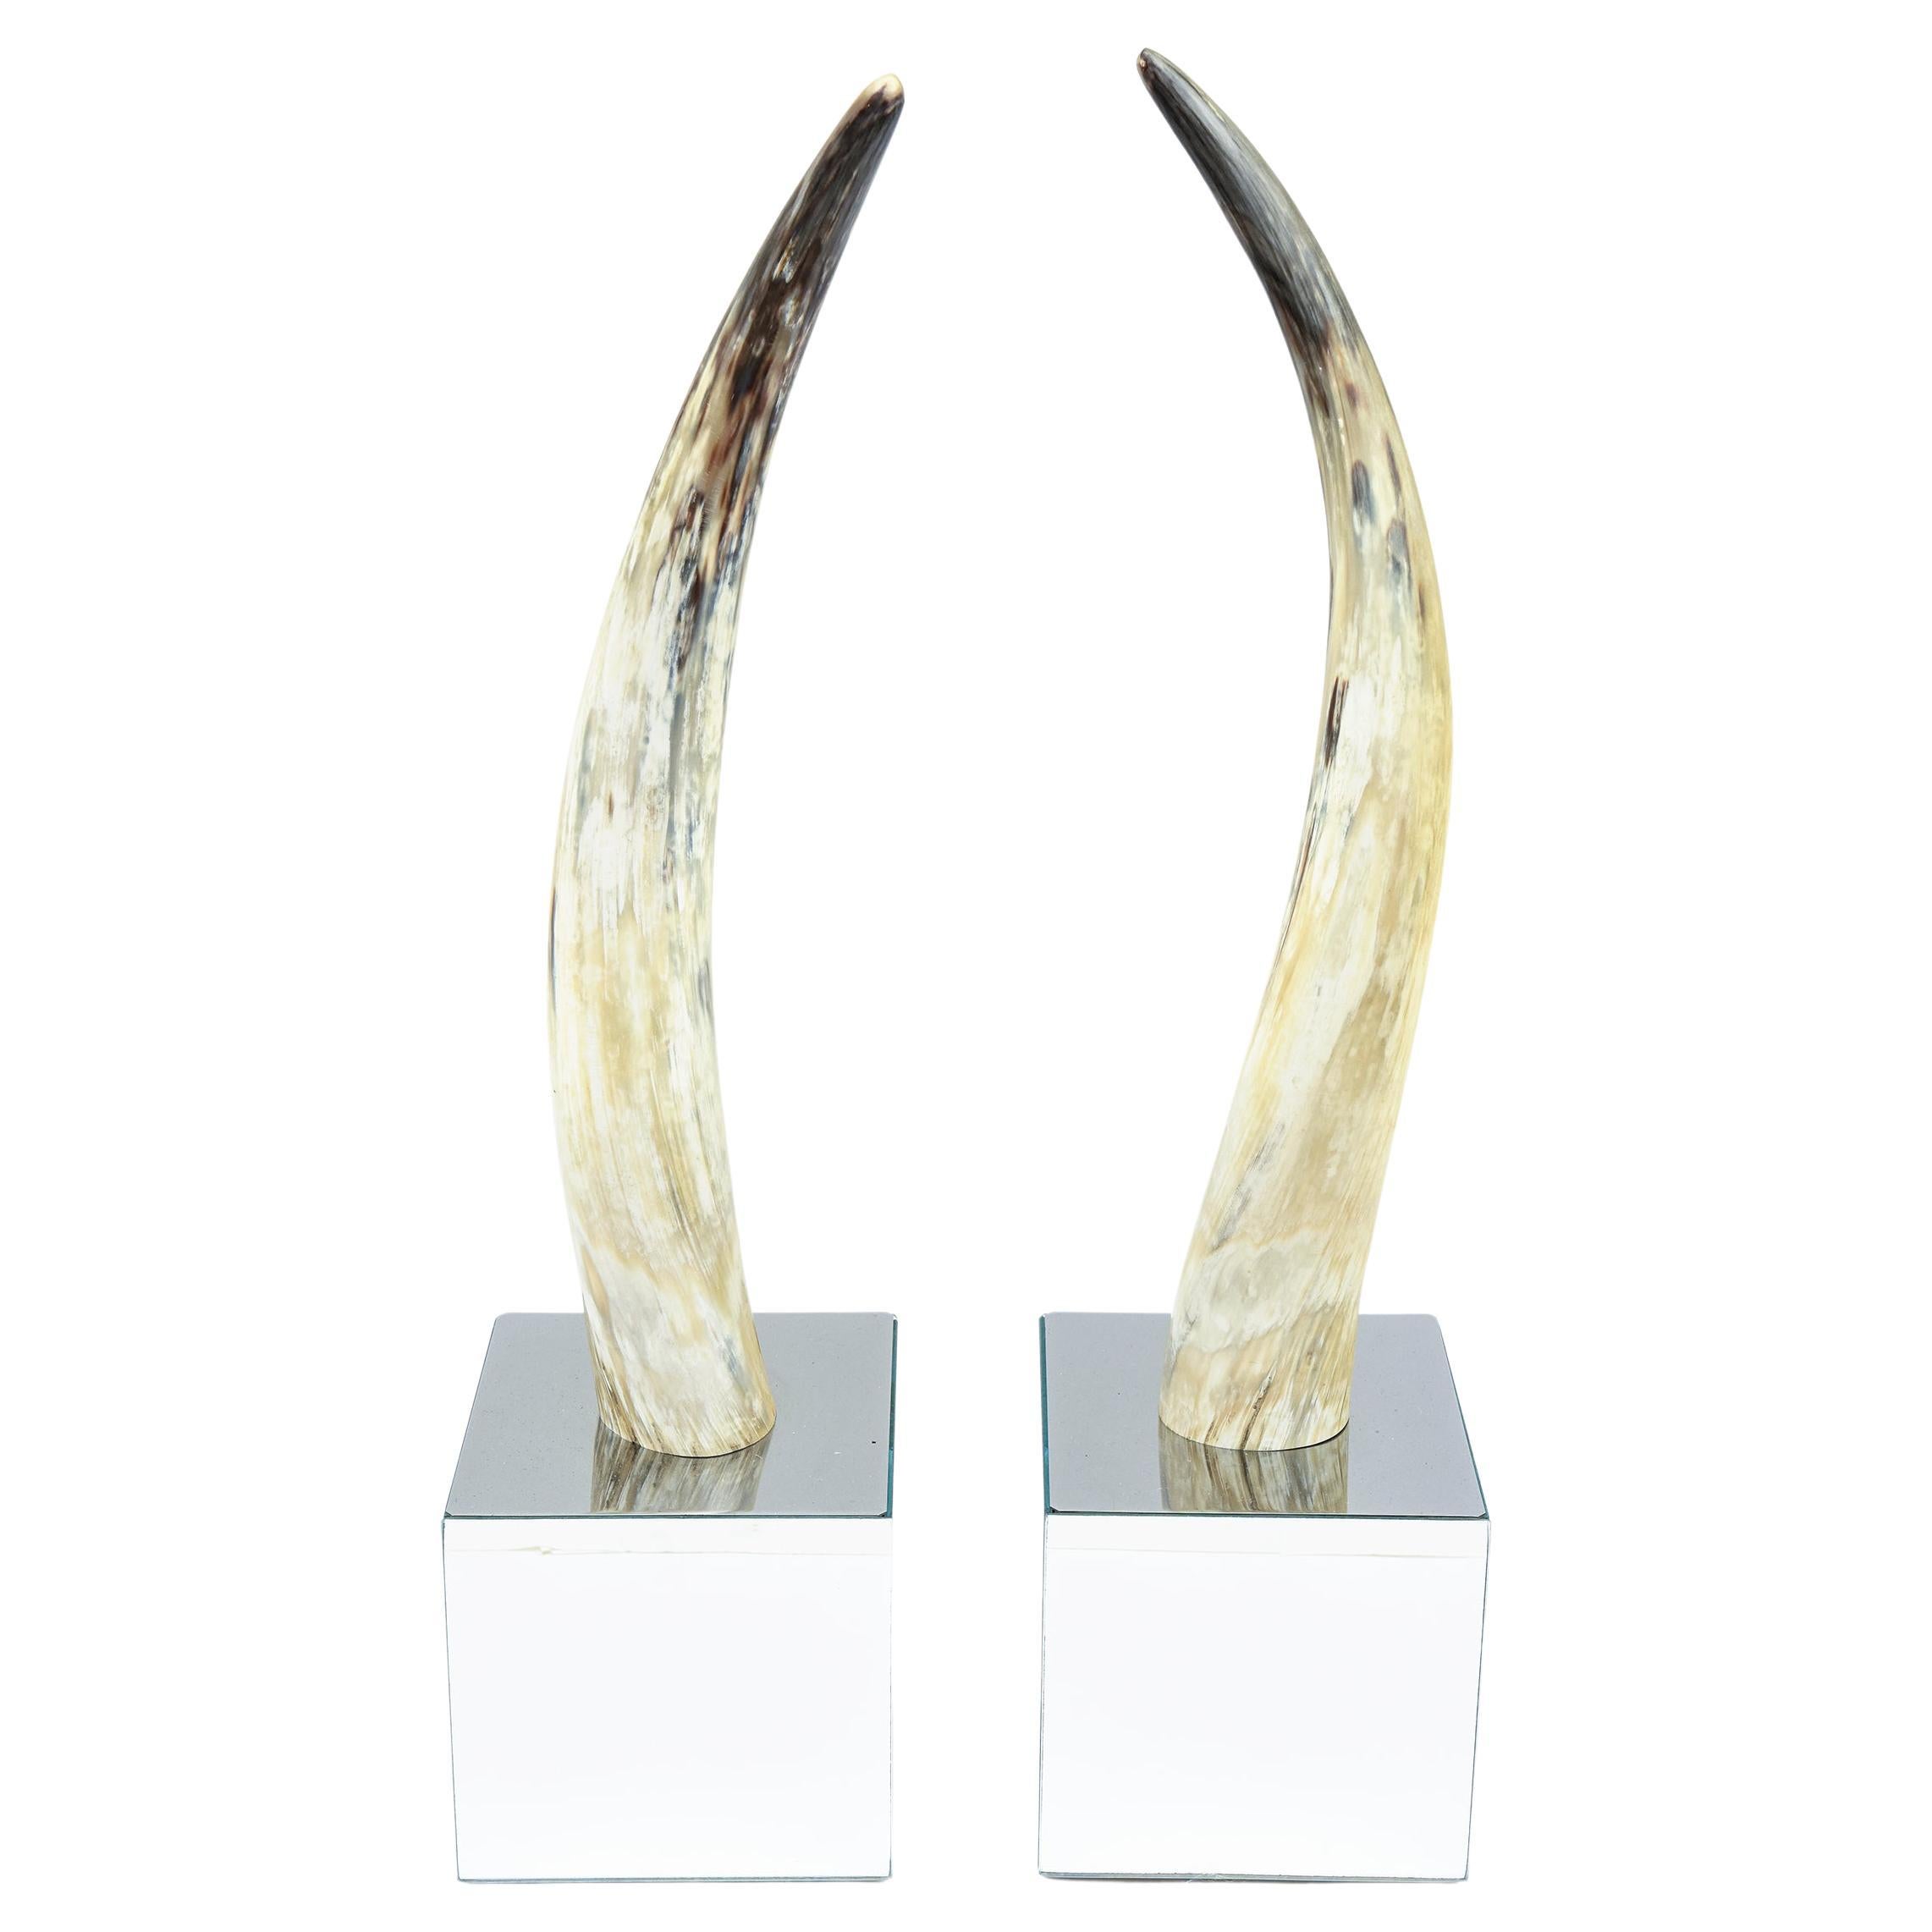 Curved Horn and Mirror Cube Sculptures Pair of